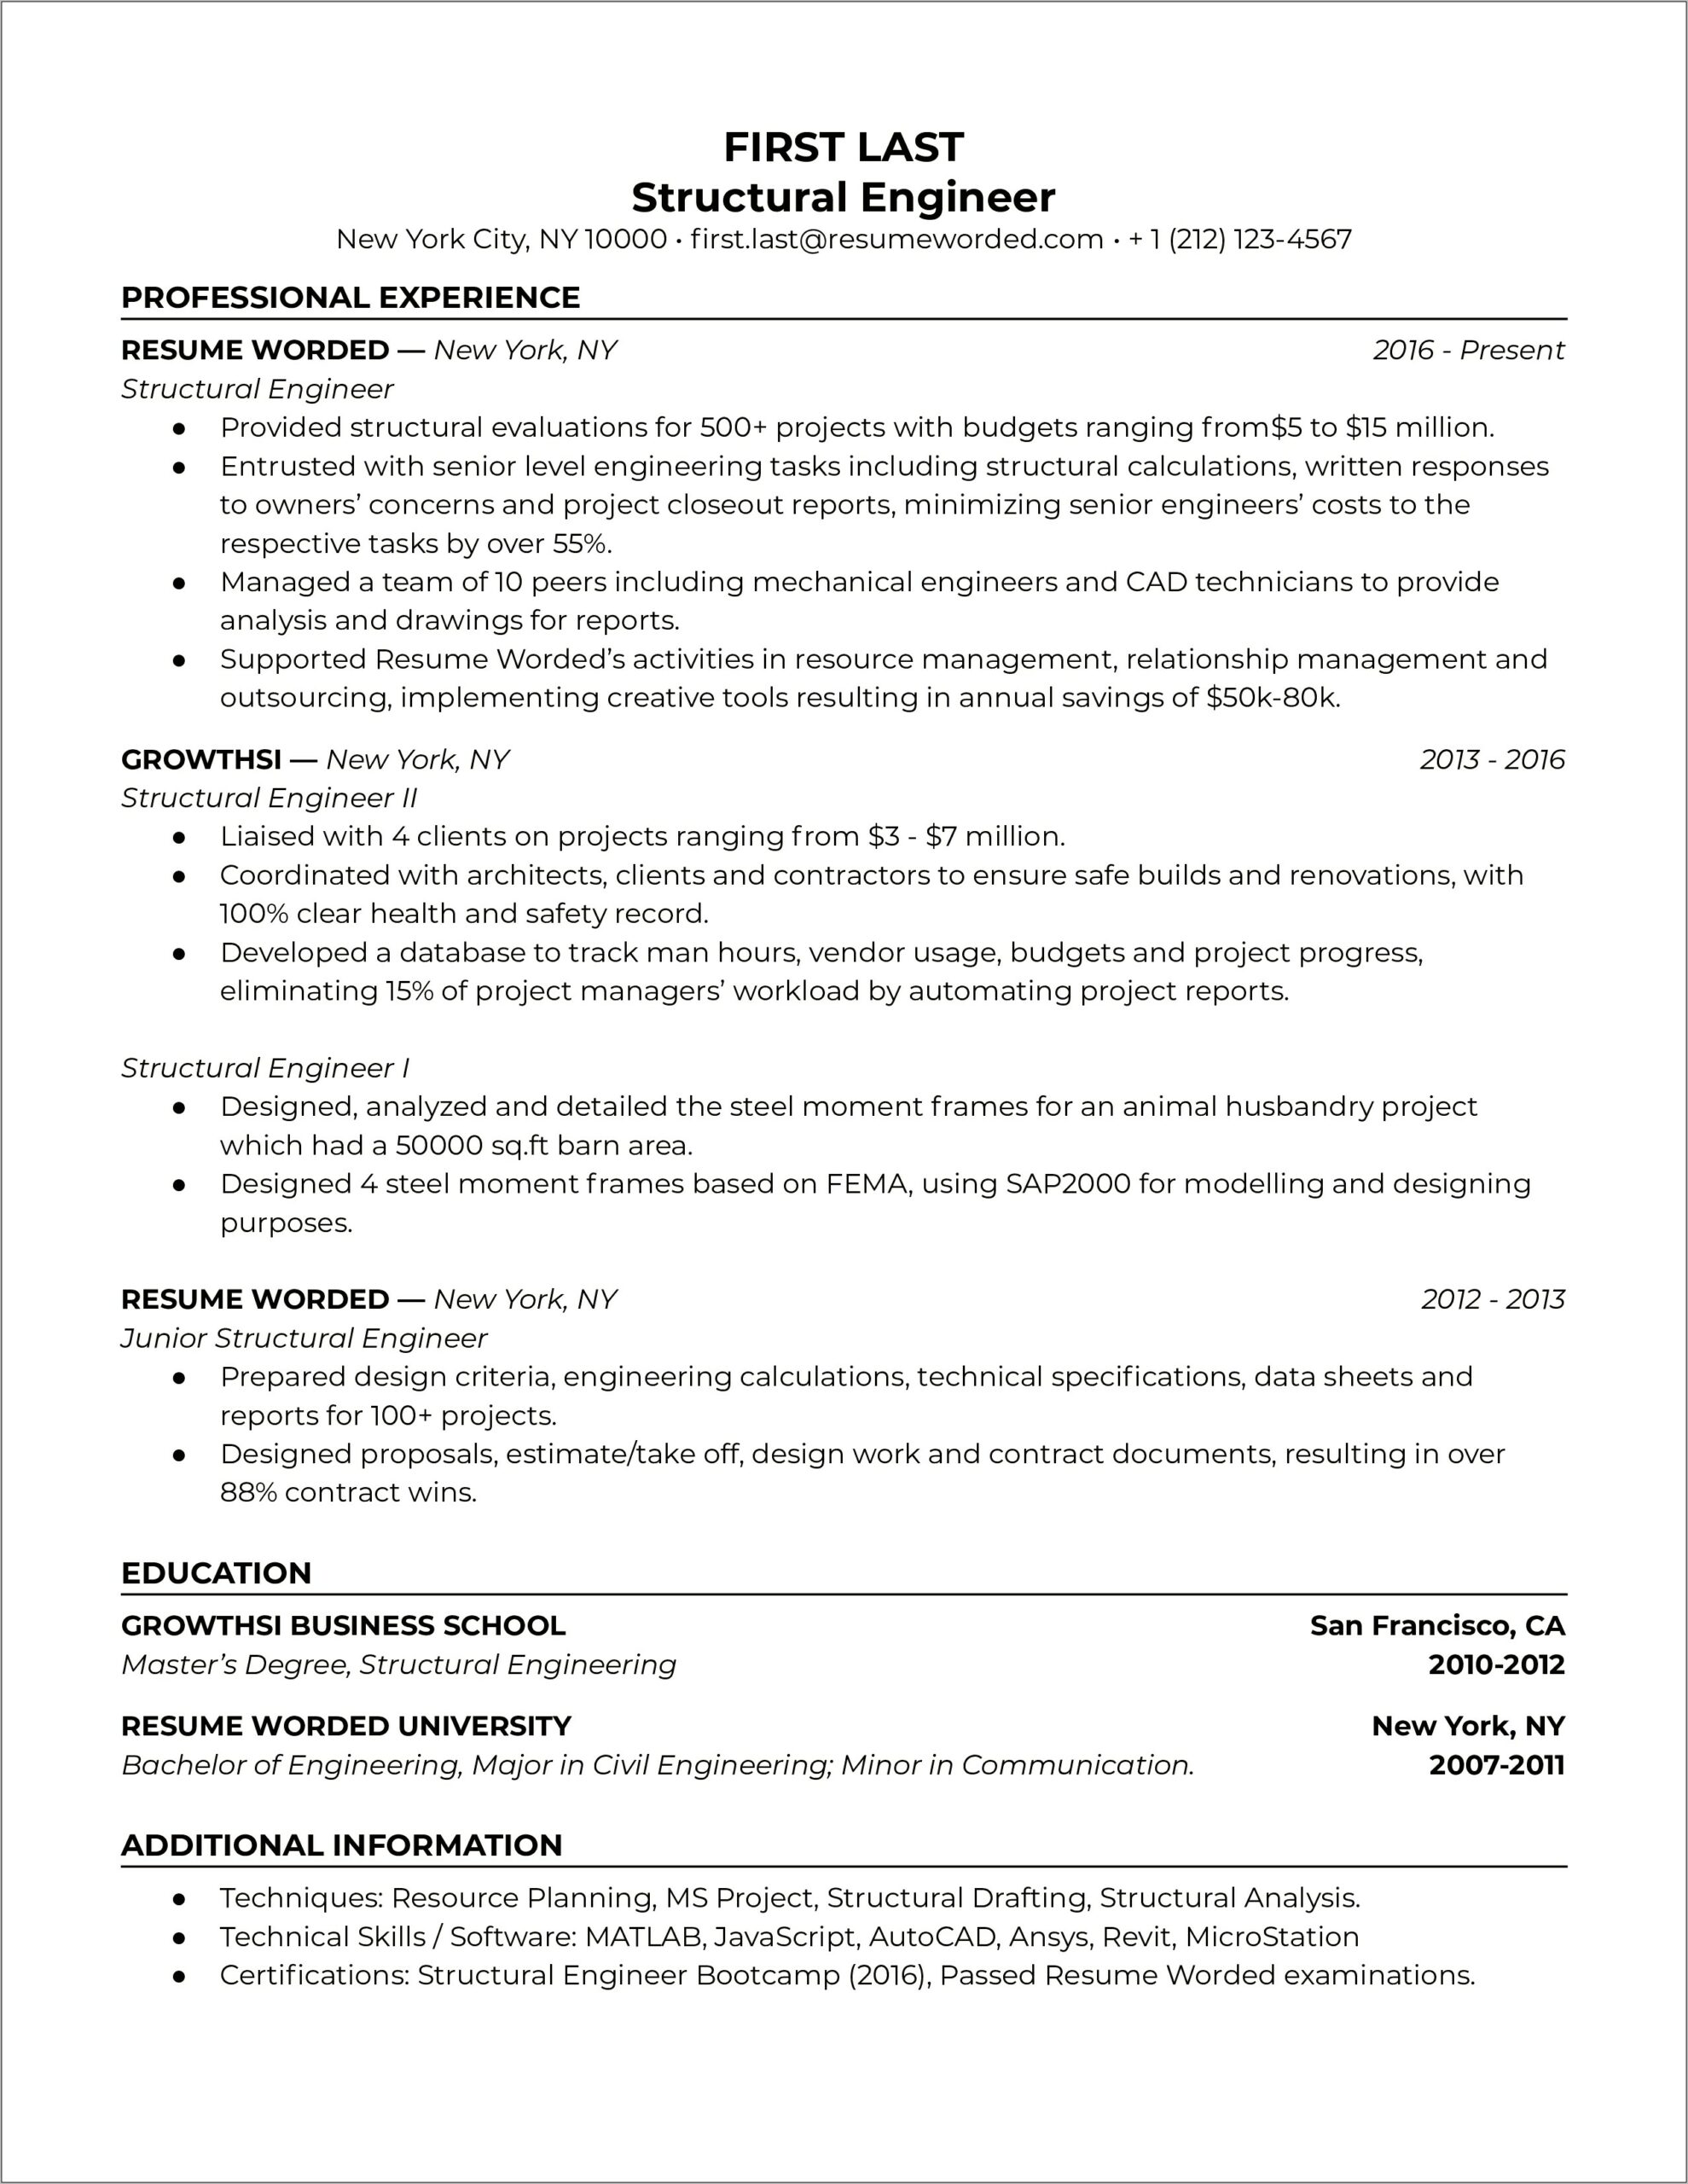 Entry Structural Engineer Resume Sample